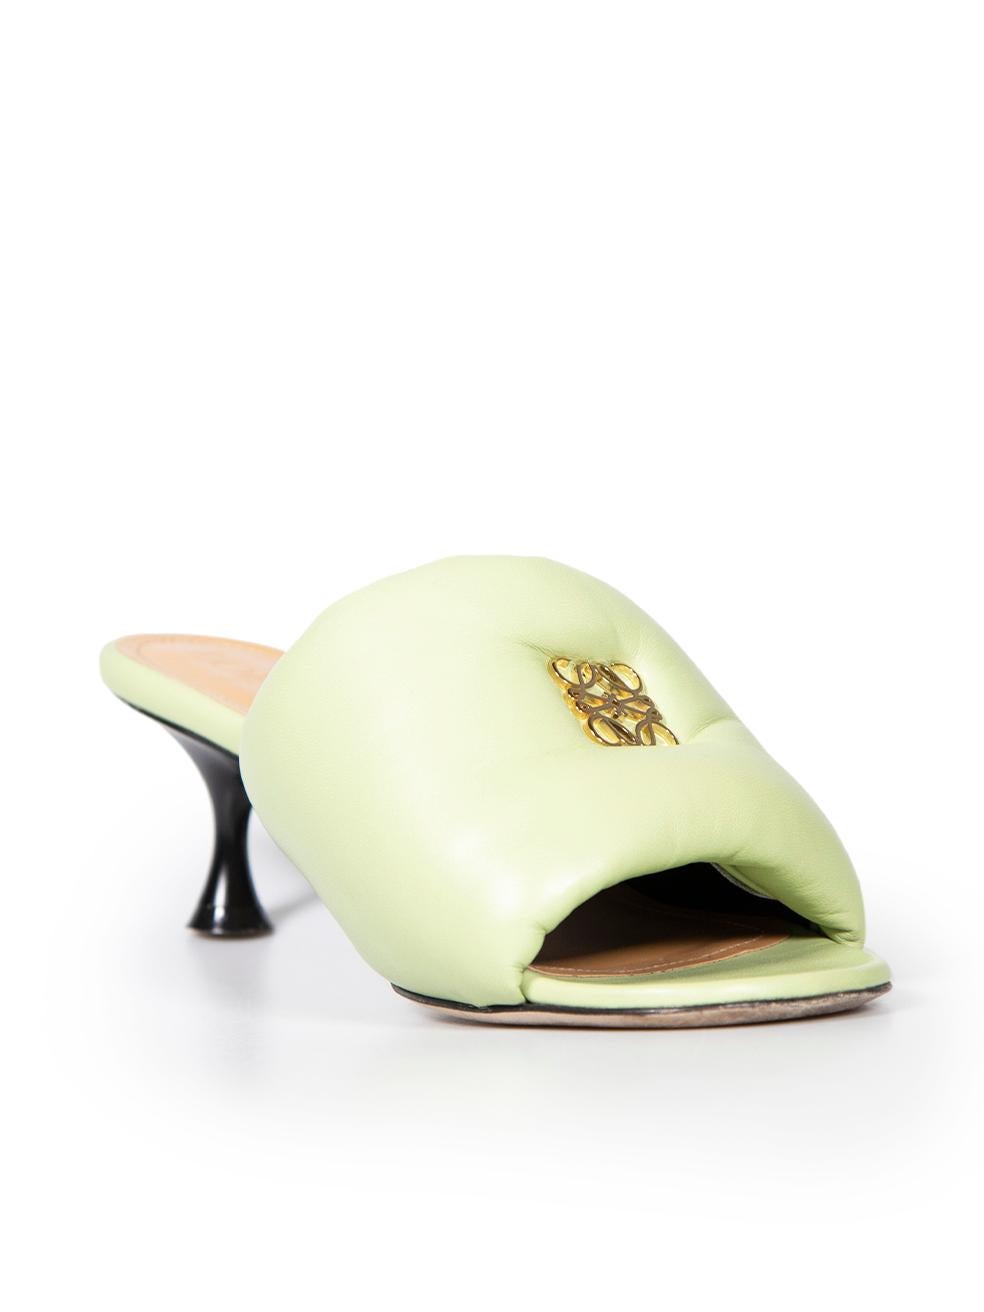 CONDITION is Very good. Minimal wear to shoes is evident. Minimal wear to right shoe toe and heel with abrasion to the leather on this used Loewe designer resale item.
 
 Details
 Light green
 Leather
 Slides
 Kitten heel
 Open toe
 Gold tone